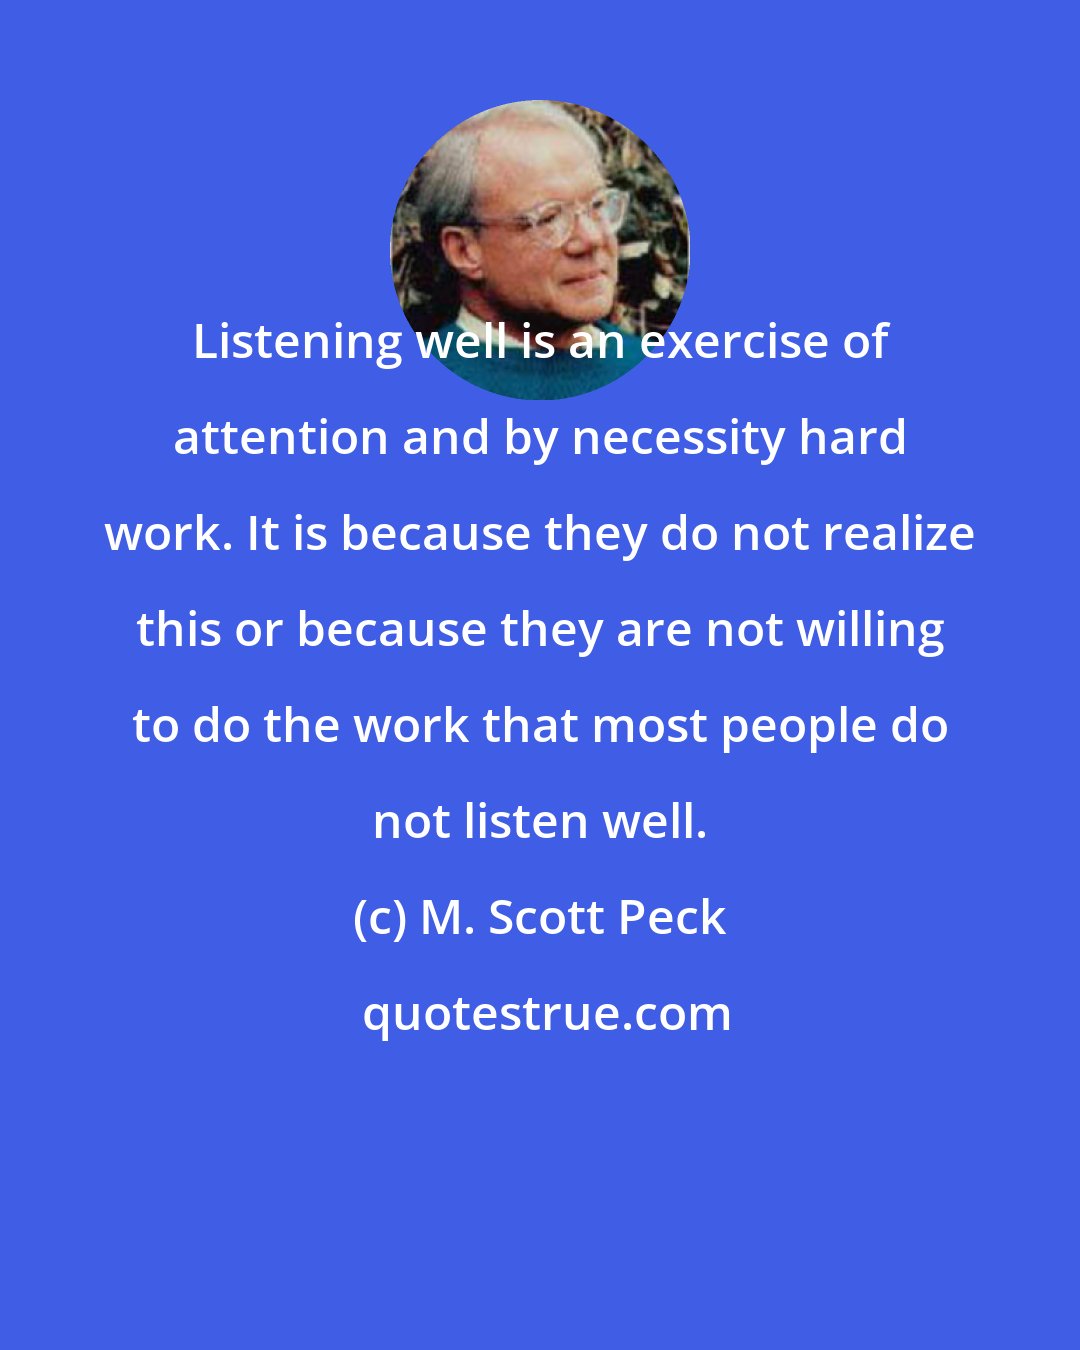 M. Scott Peck: Listening well is an exercise of attention and by necessity hard work. It is because they do not realize this or because they are not willing to do the work that most people do not listen well.